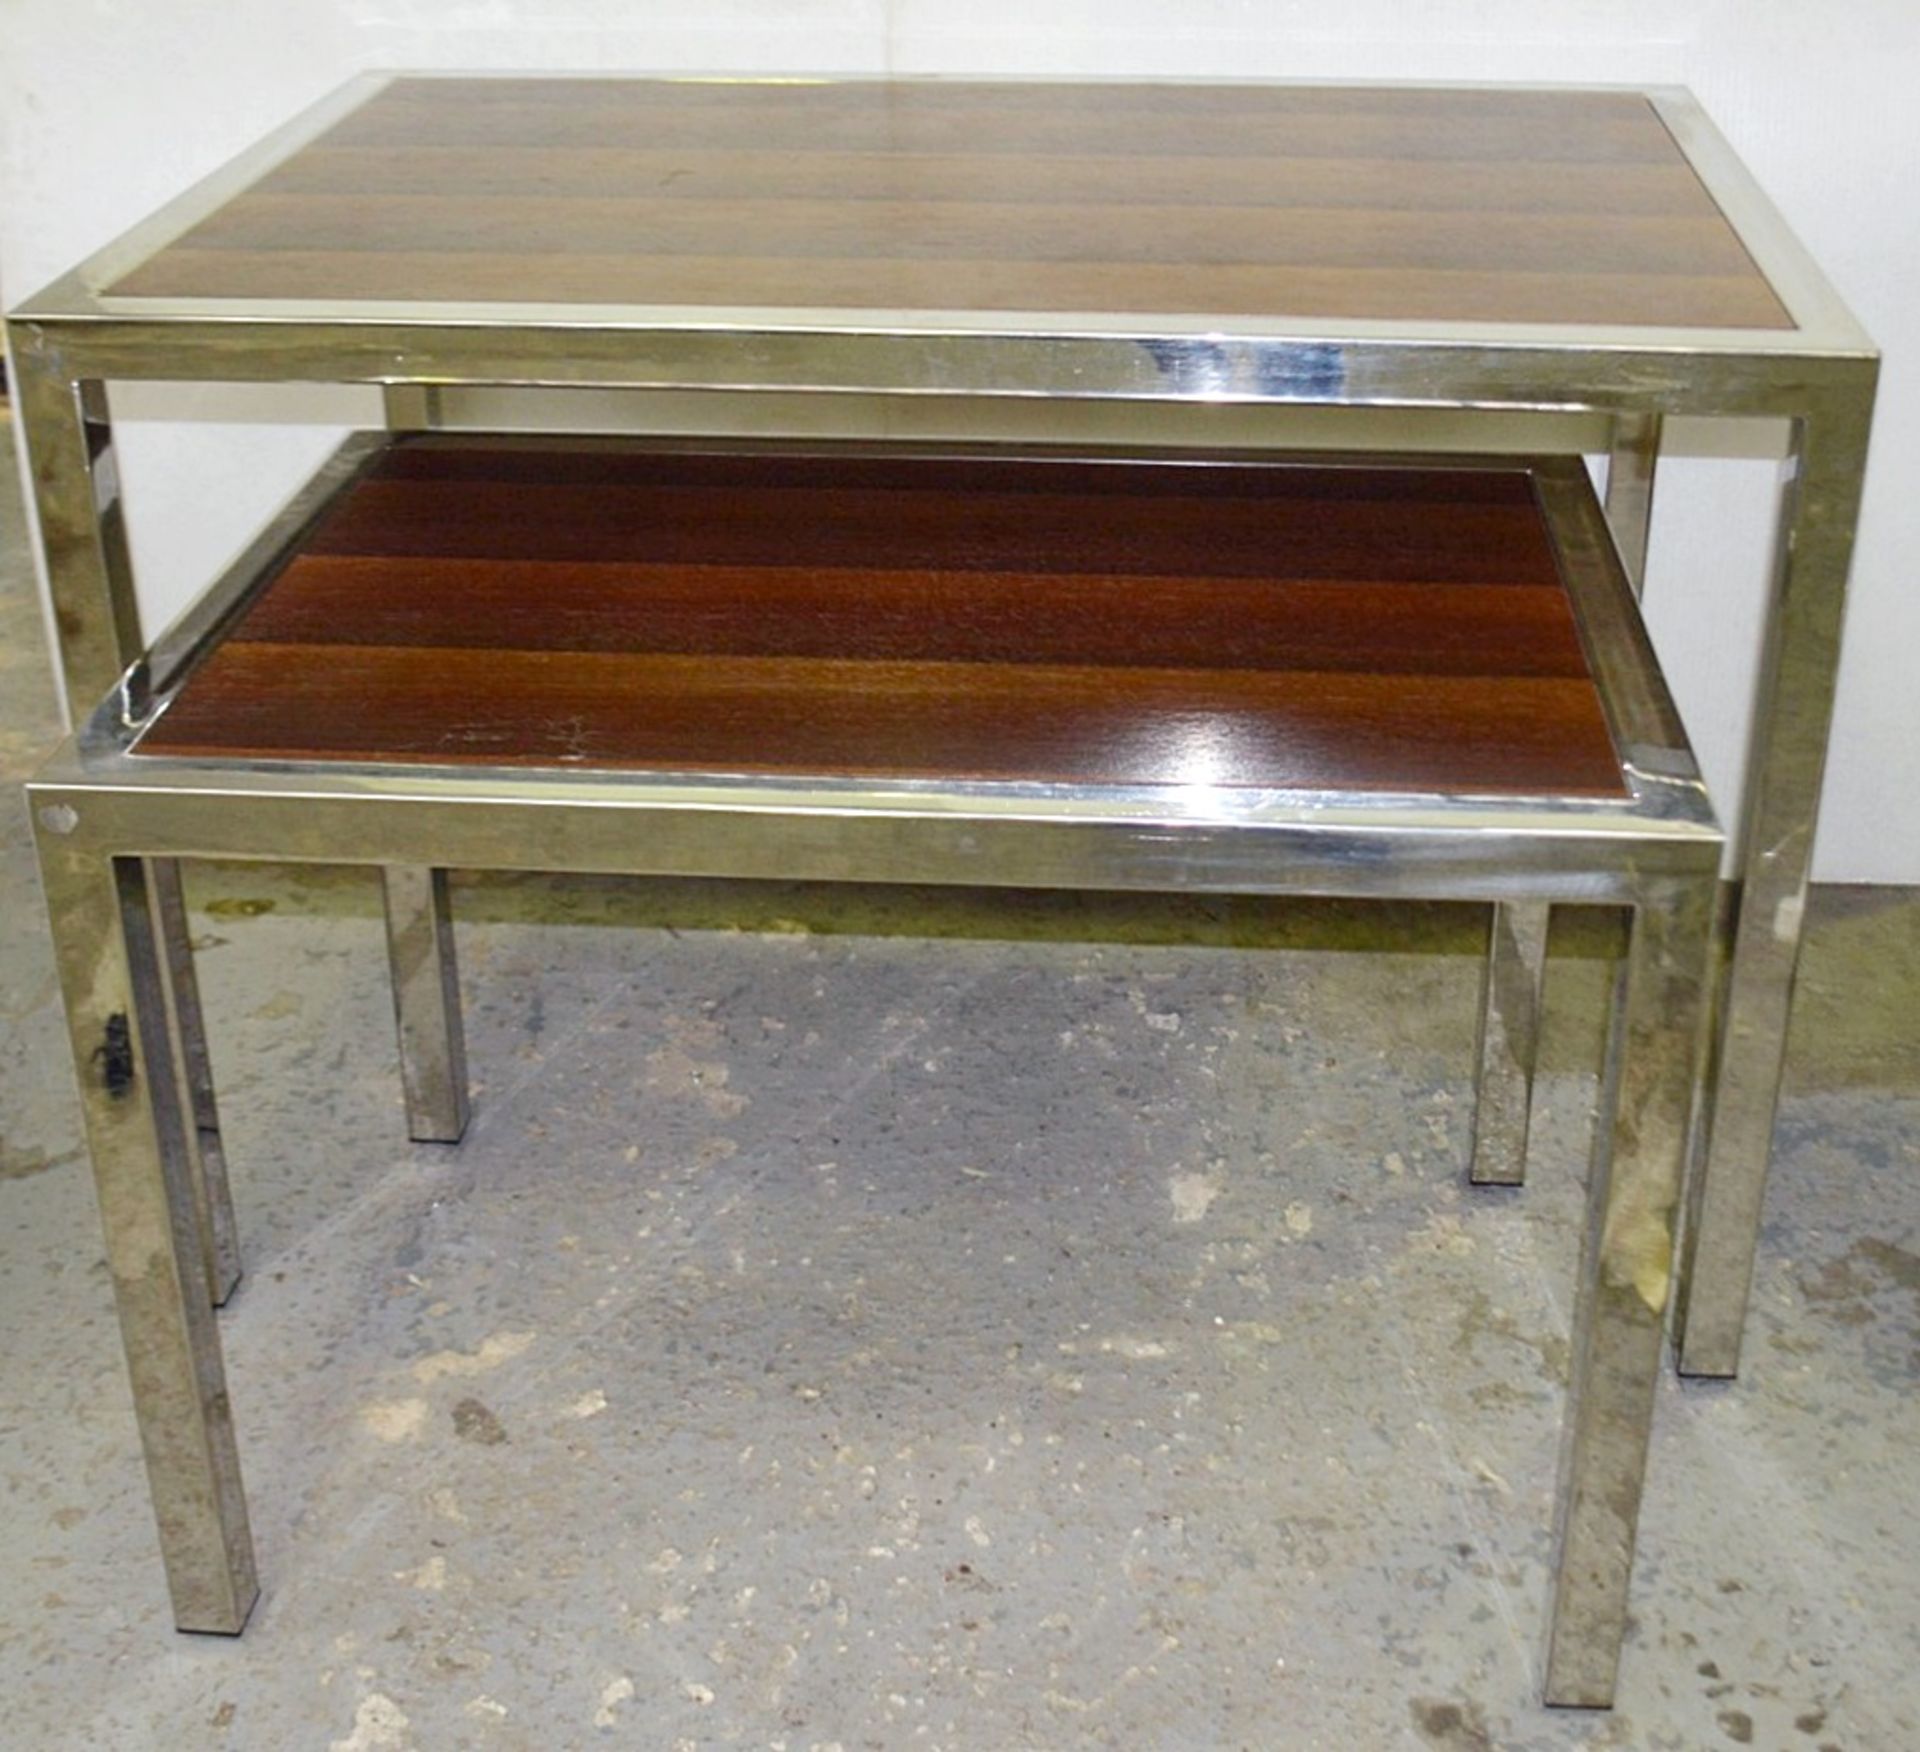 Set of 2 x Large Nesting Display Tables With Chrome Frames - Ex-Showroom Piece - Ref: HAR155 GIT -